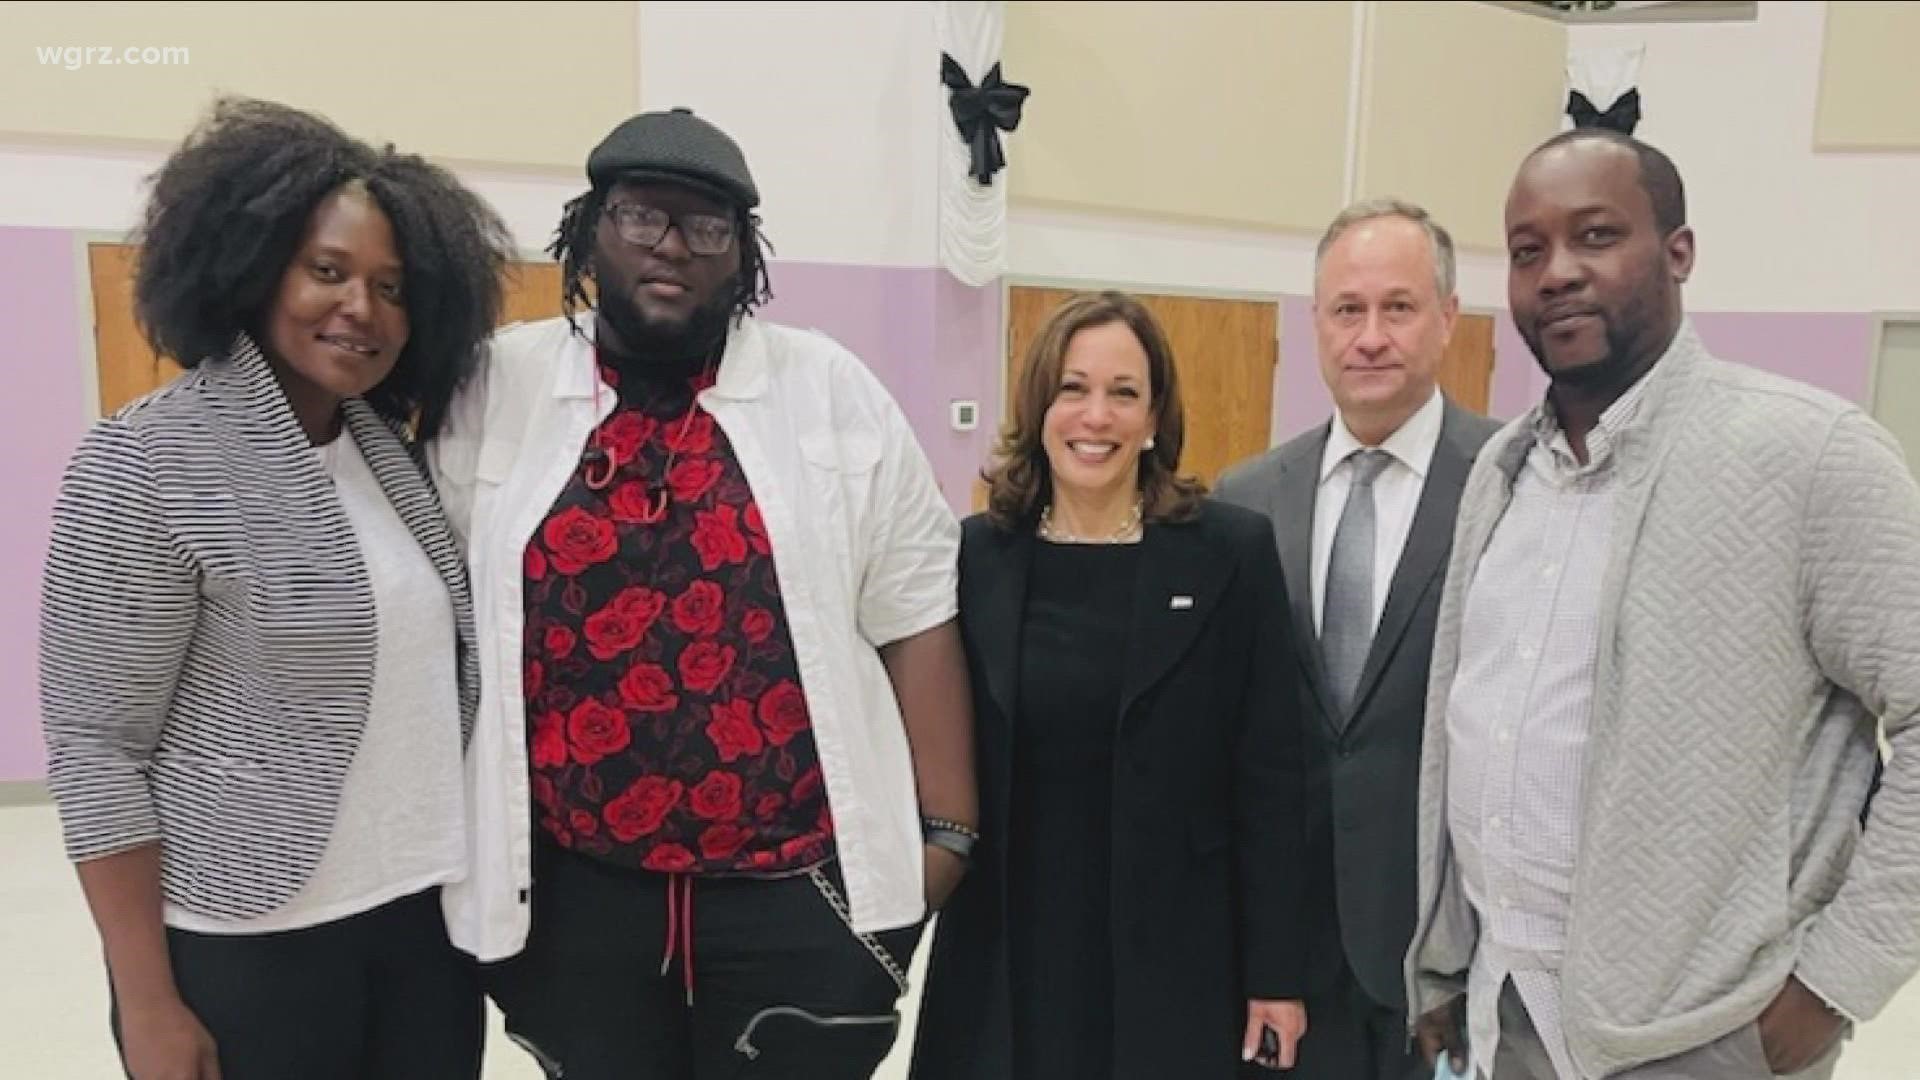 Kamala Harris met with families of some of the other victims from the tragedy two weeks ago. She got to meet and speak with one of the survivors, Zaire Goodman.